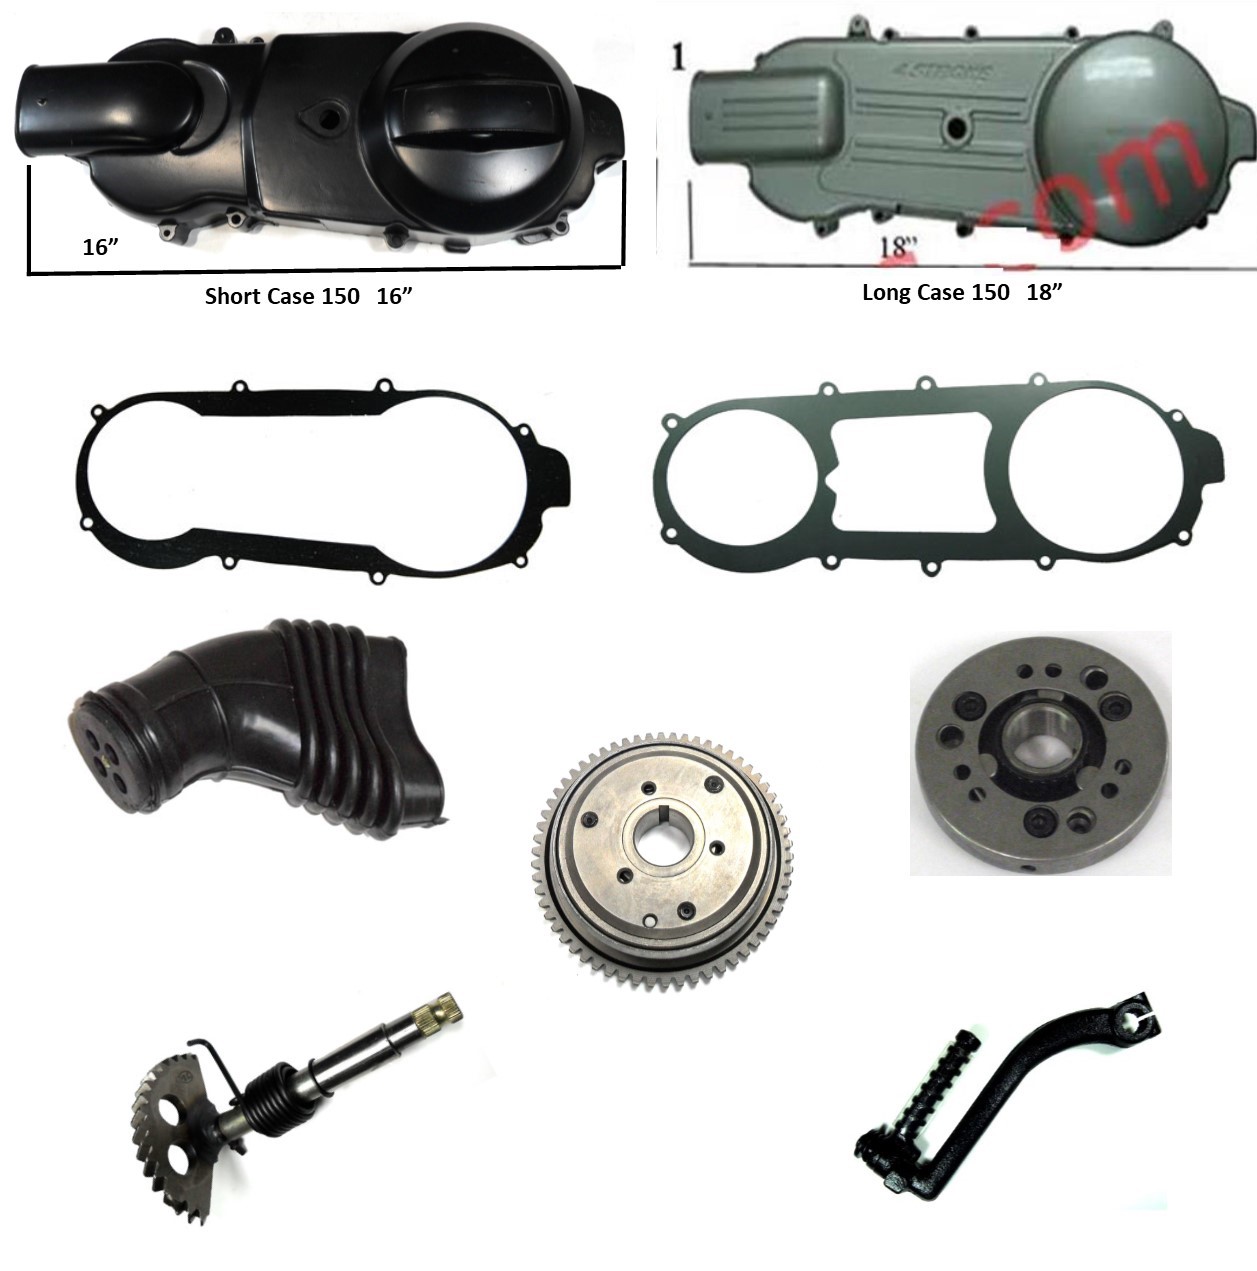 Kick Start Starting Gear Set GY6 150cc Chinese Scooter Parts ATV Go Kart  Moped